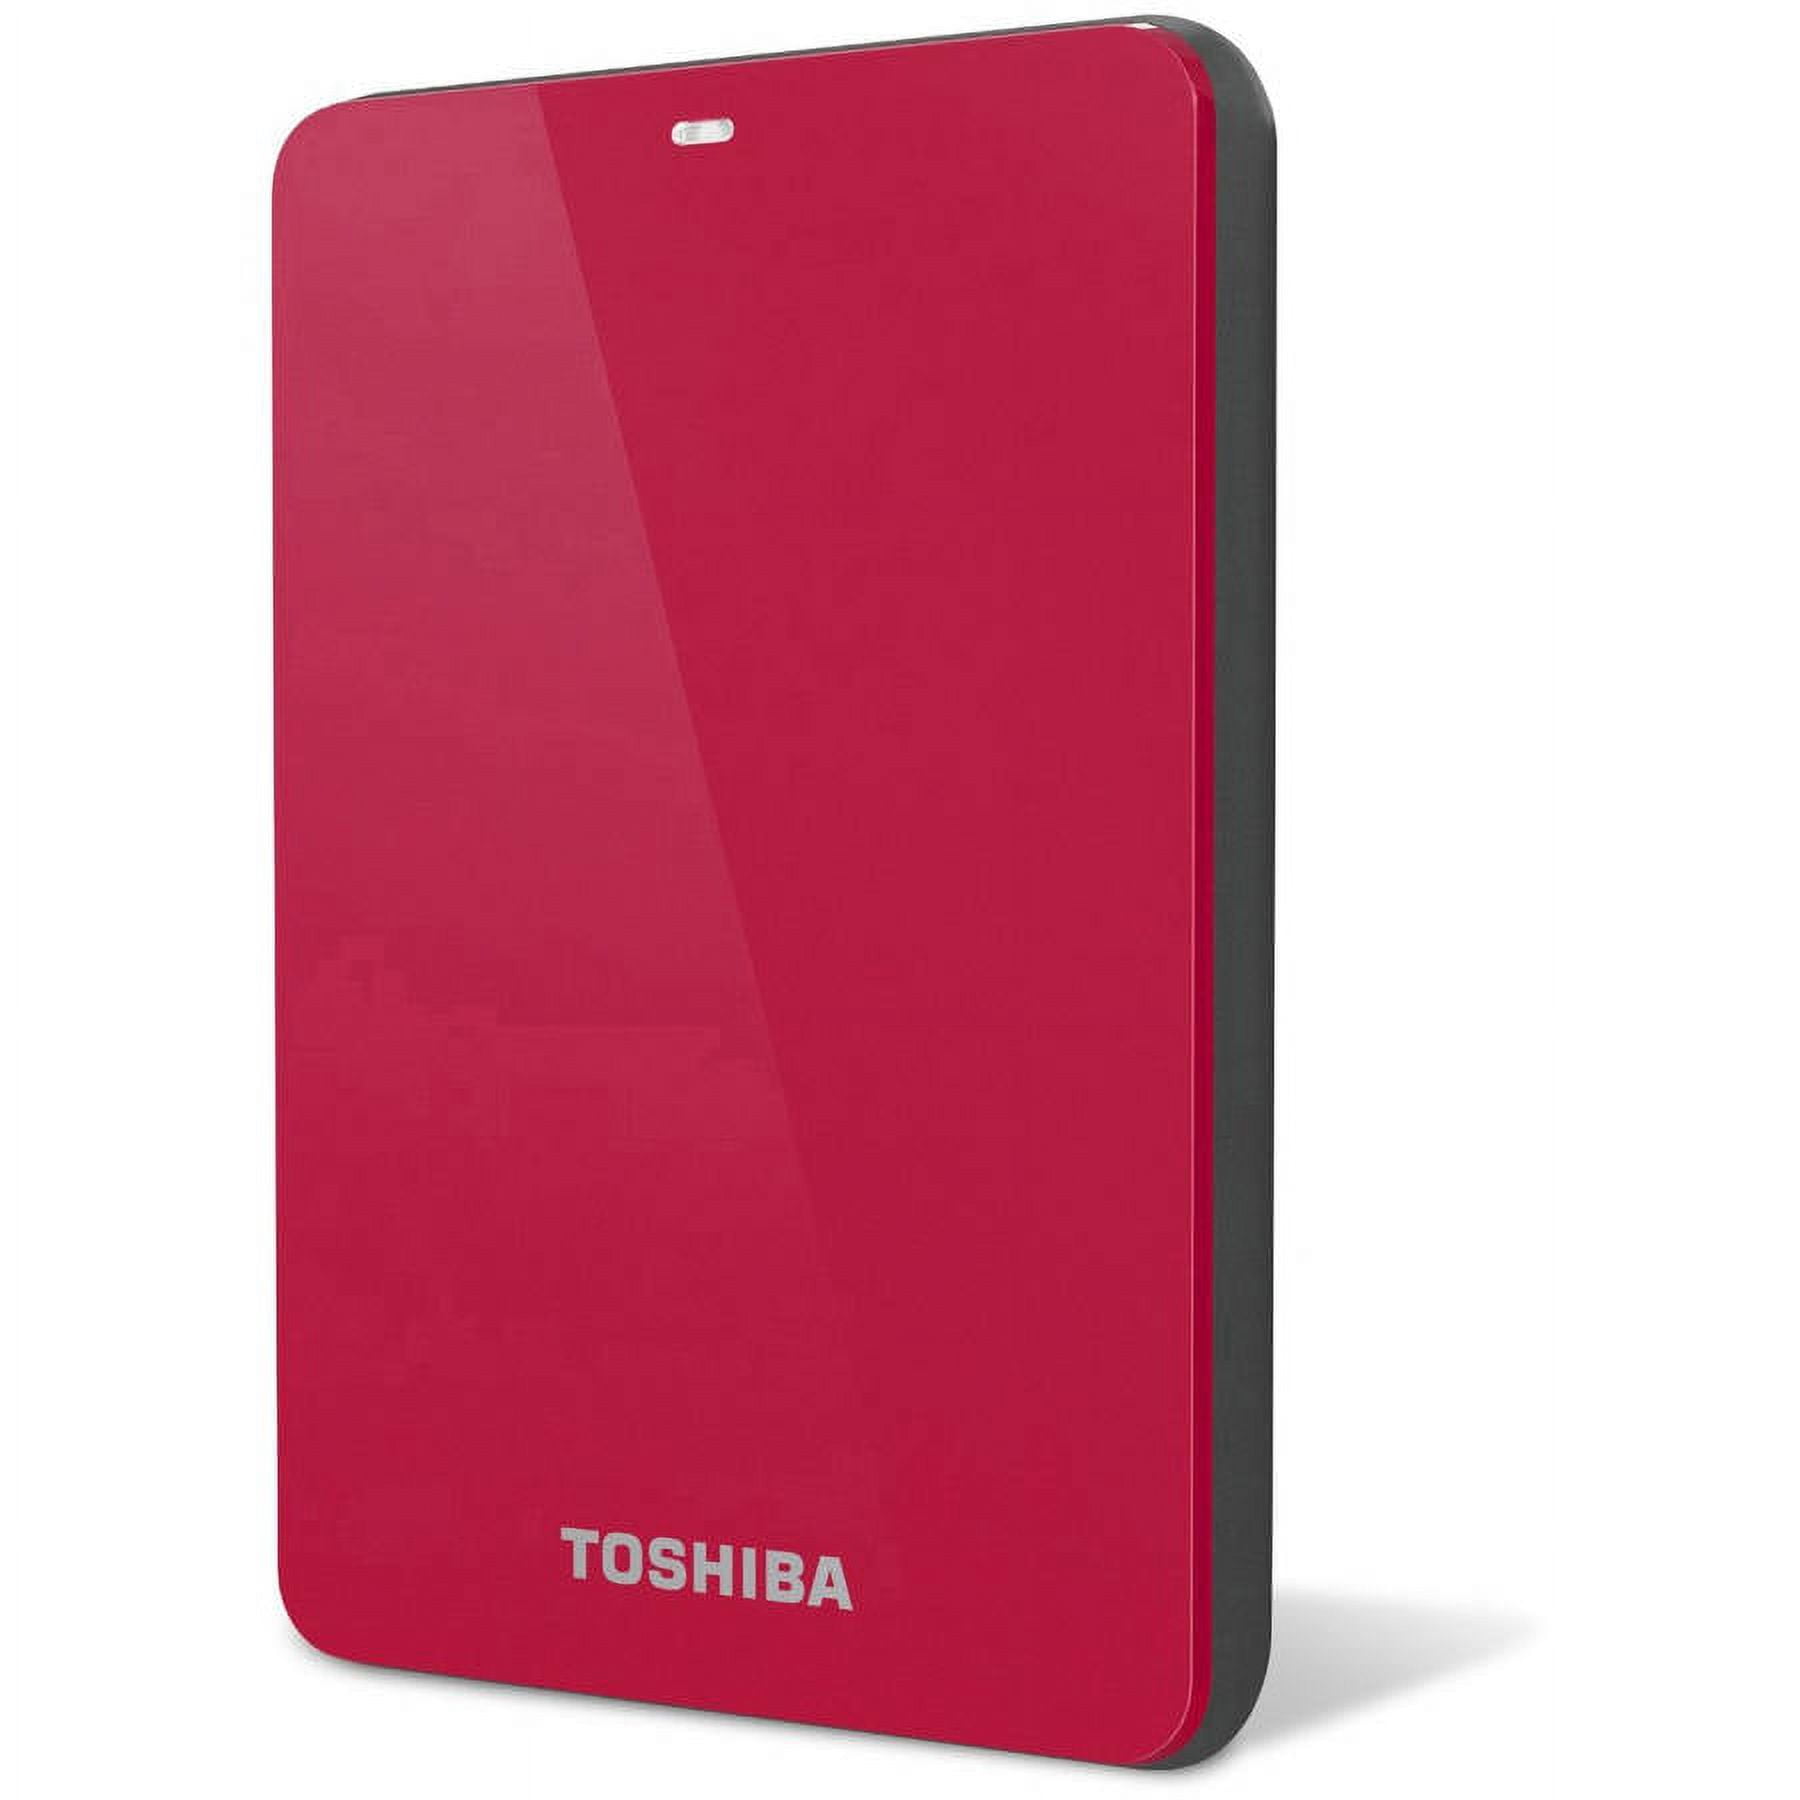 Get a Toshiba 1TB USB 3.0 portable hard drive for $49.99 - CNET